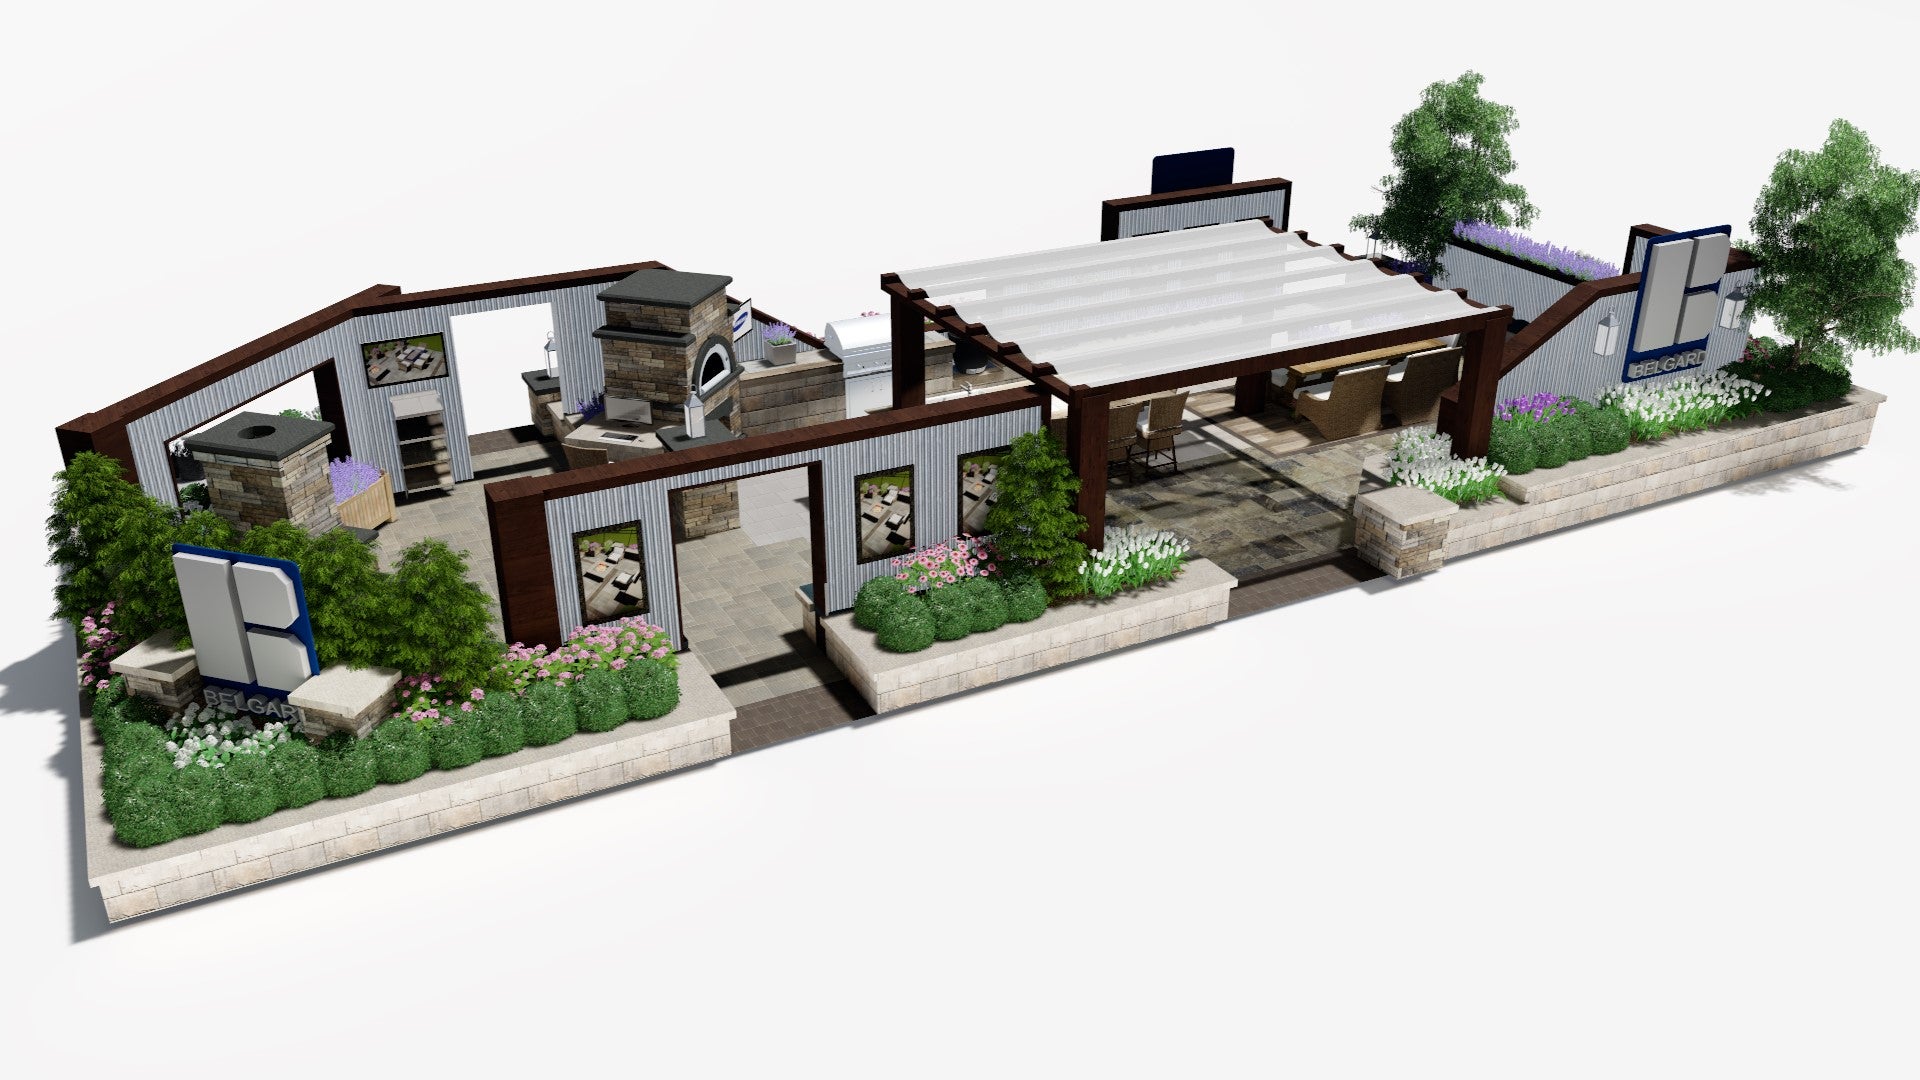 Rendering of the future Belgard display at the upcoming Philadelphia Flower Show.